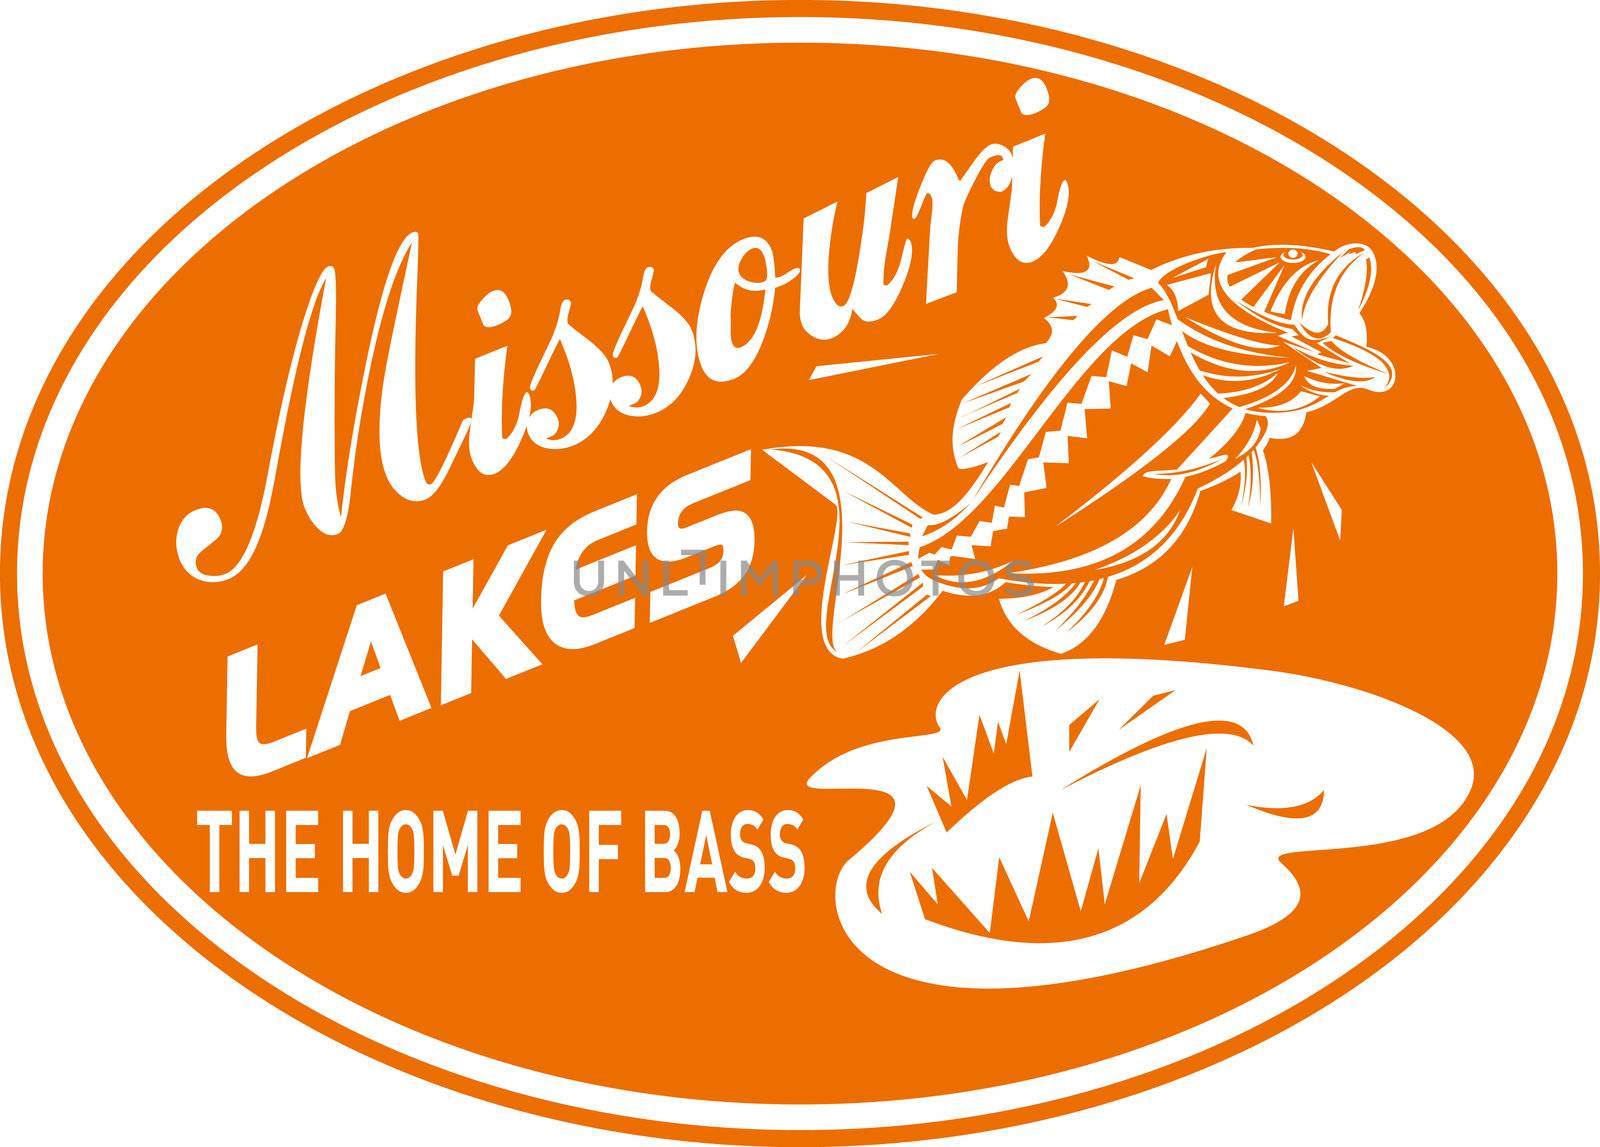 illustration of a largemouth bass jumping with words "missouri lakes home of bass"